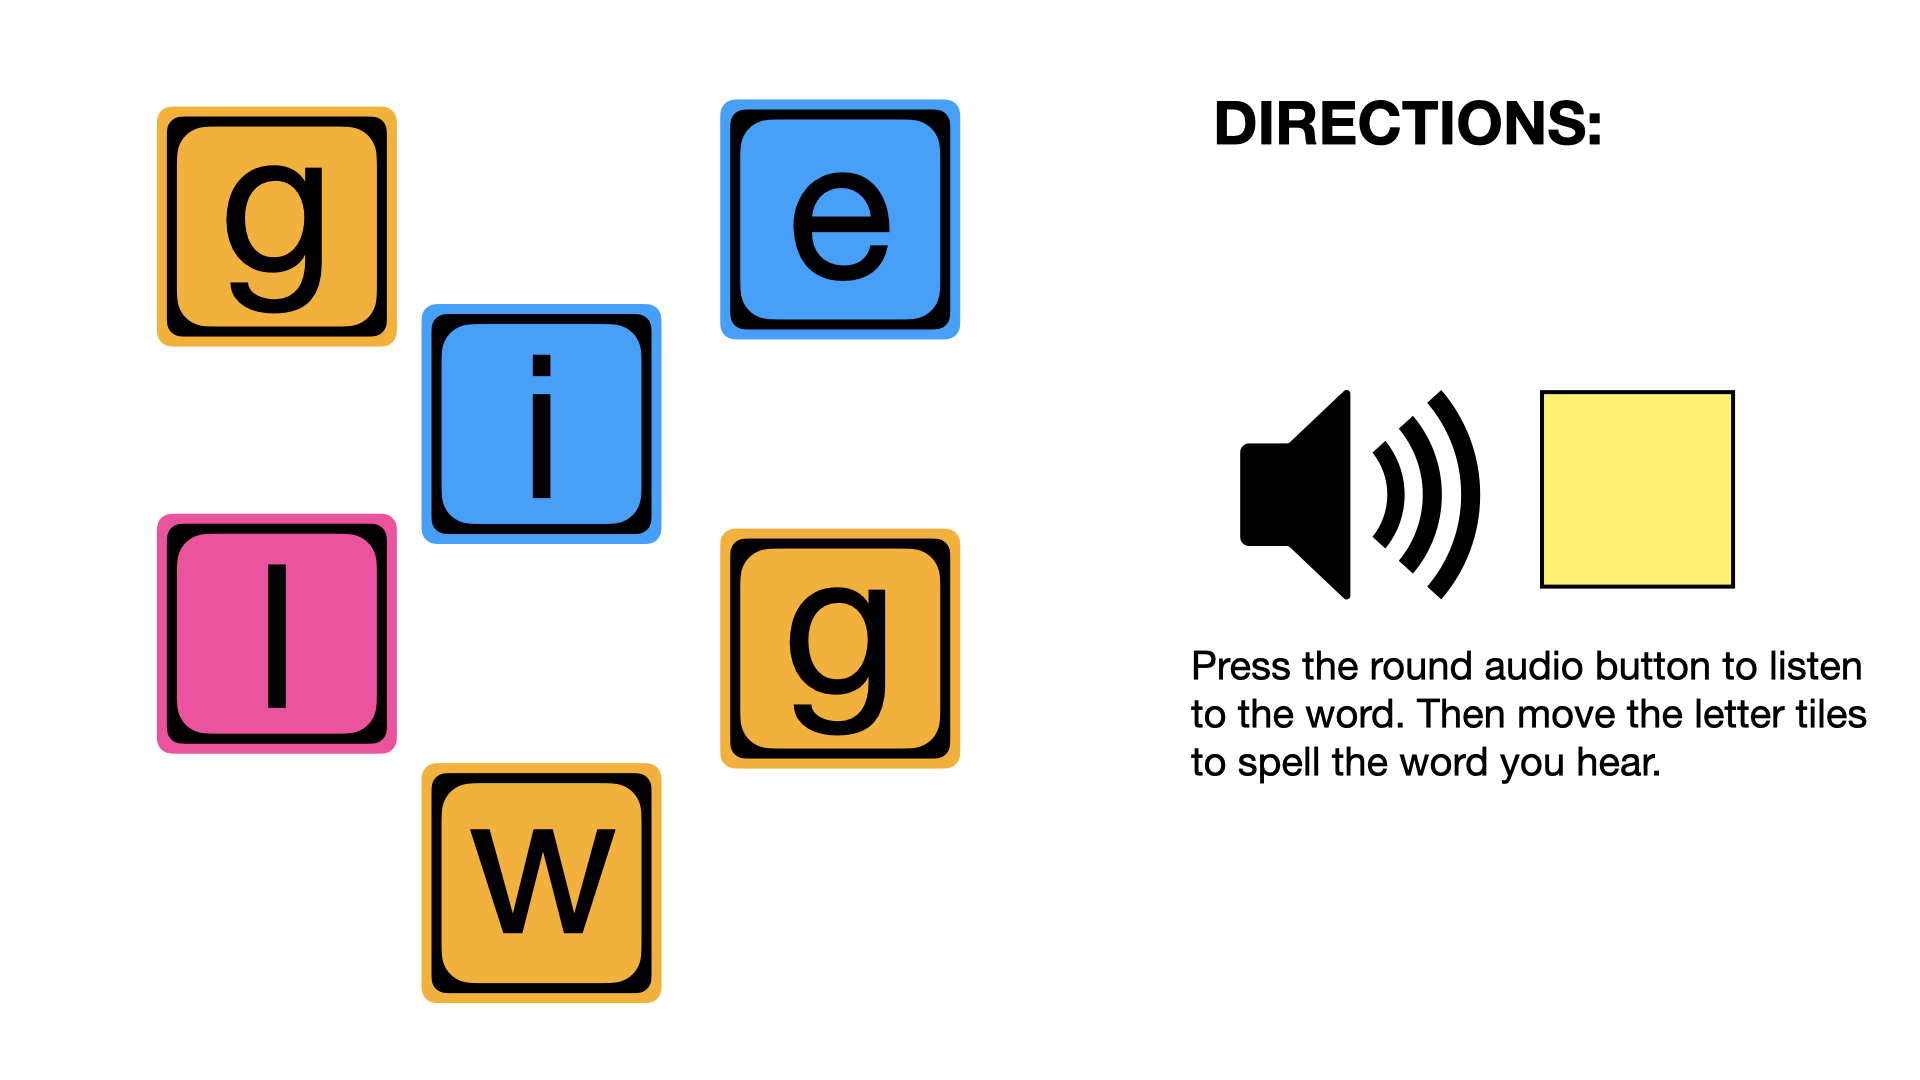 Keynote slide with letter tiles and and audio button, prompting students to spell a word with the letter tiles